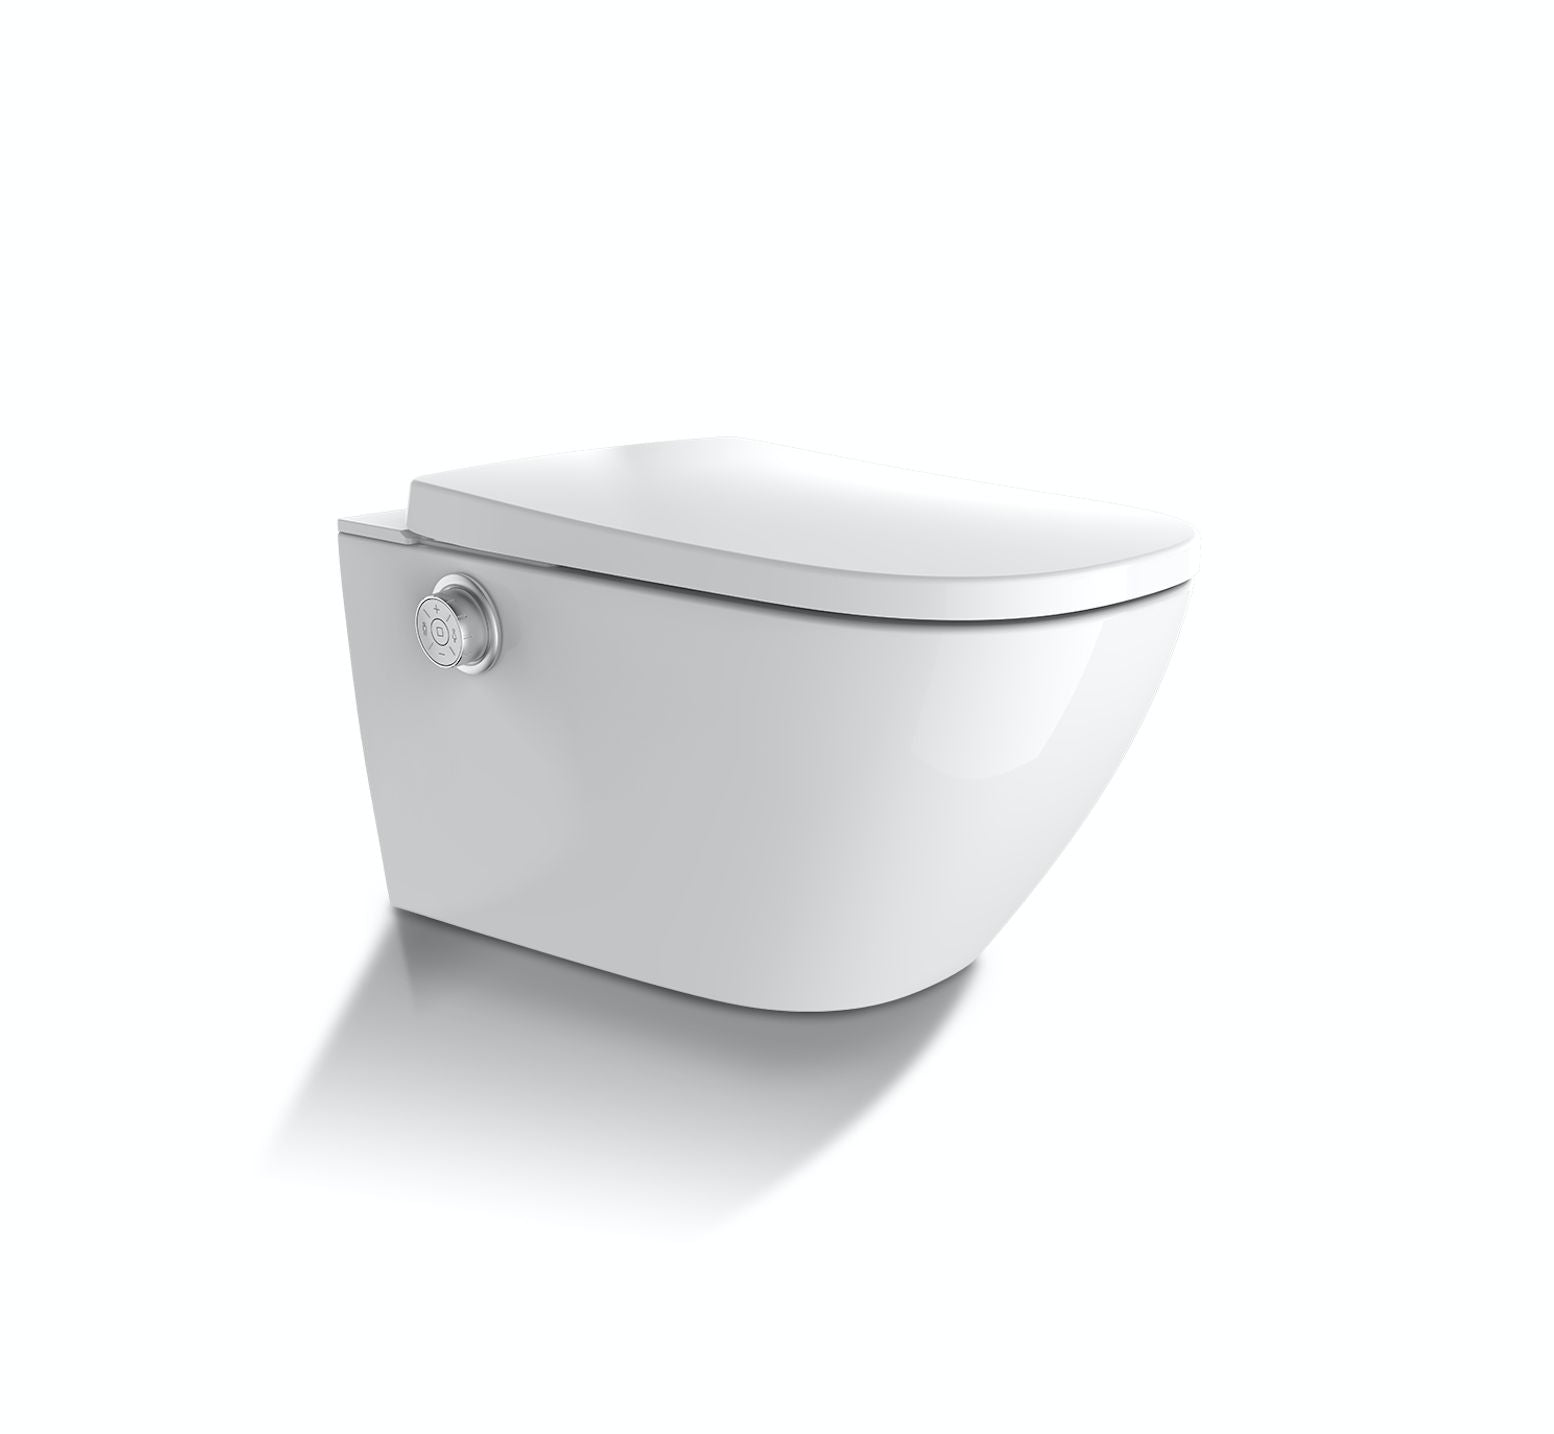 GALLARIA LENZA COMFORT RIMLESS WALL FACE PAN AND REMOTE WASHLET PACKAGE GLOSS WHITE